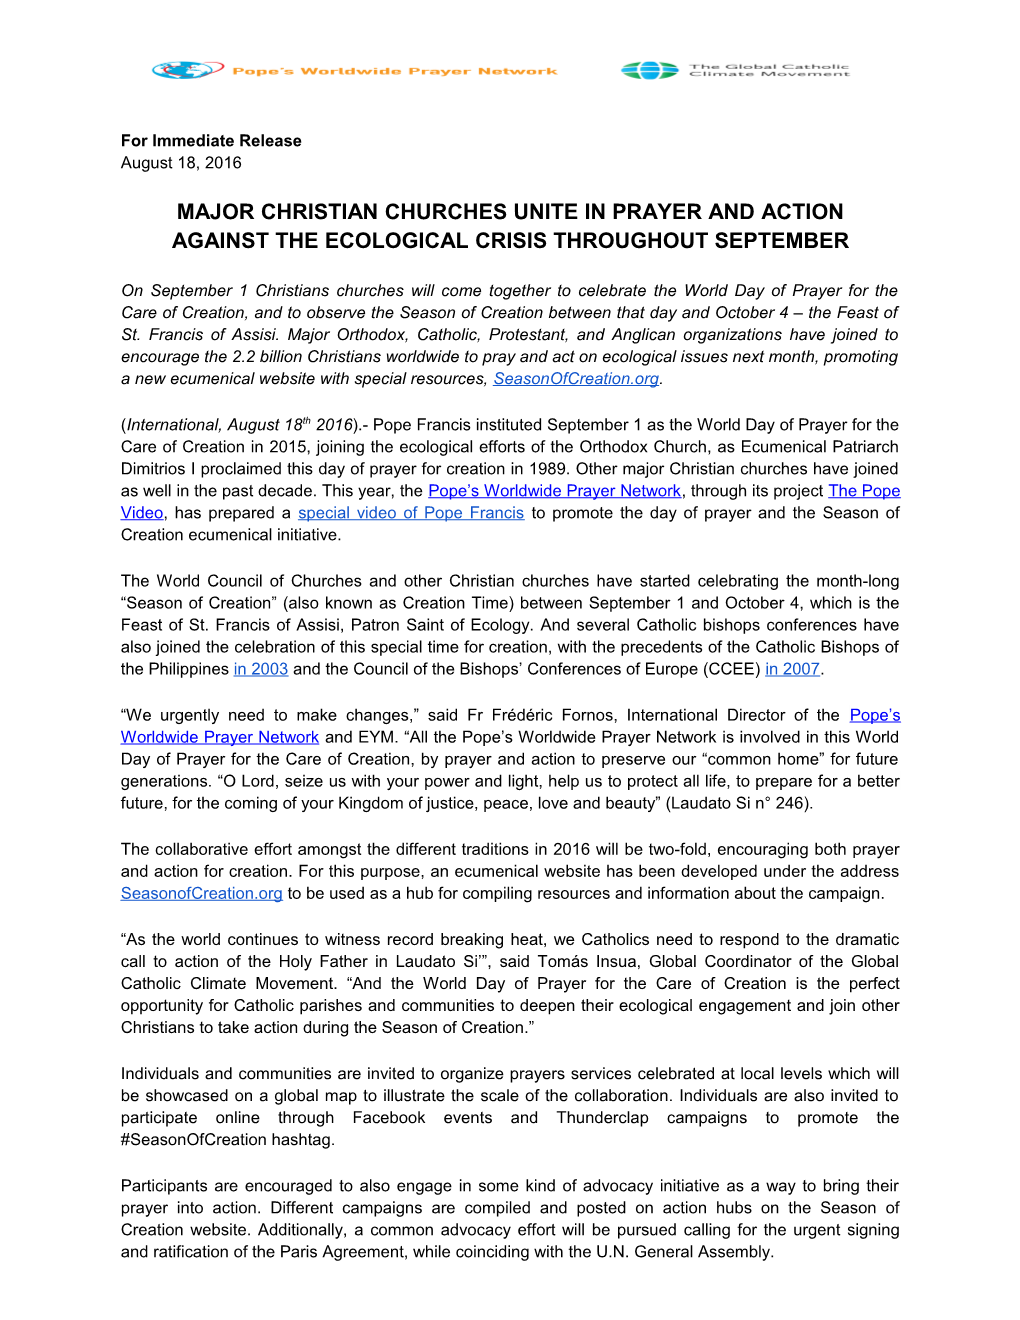 Major Christian Churches Unite in Prayer and Action